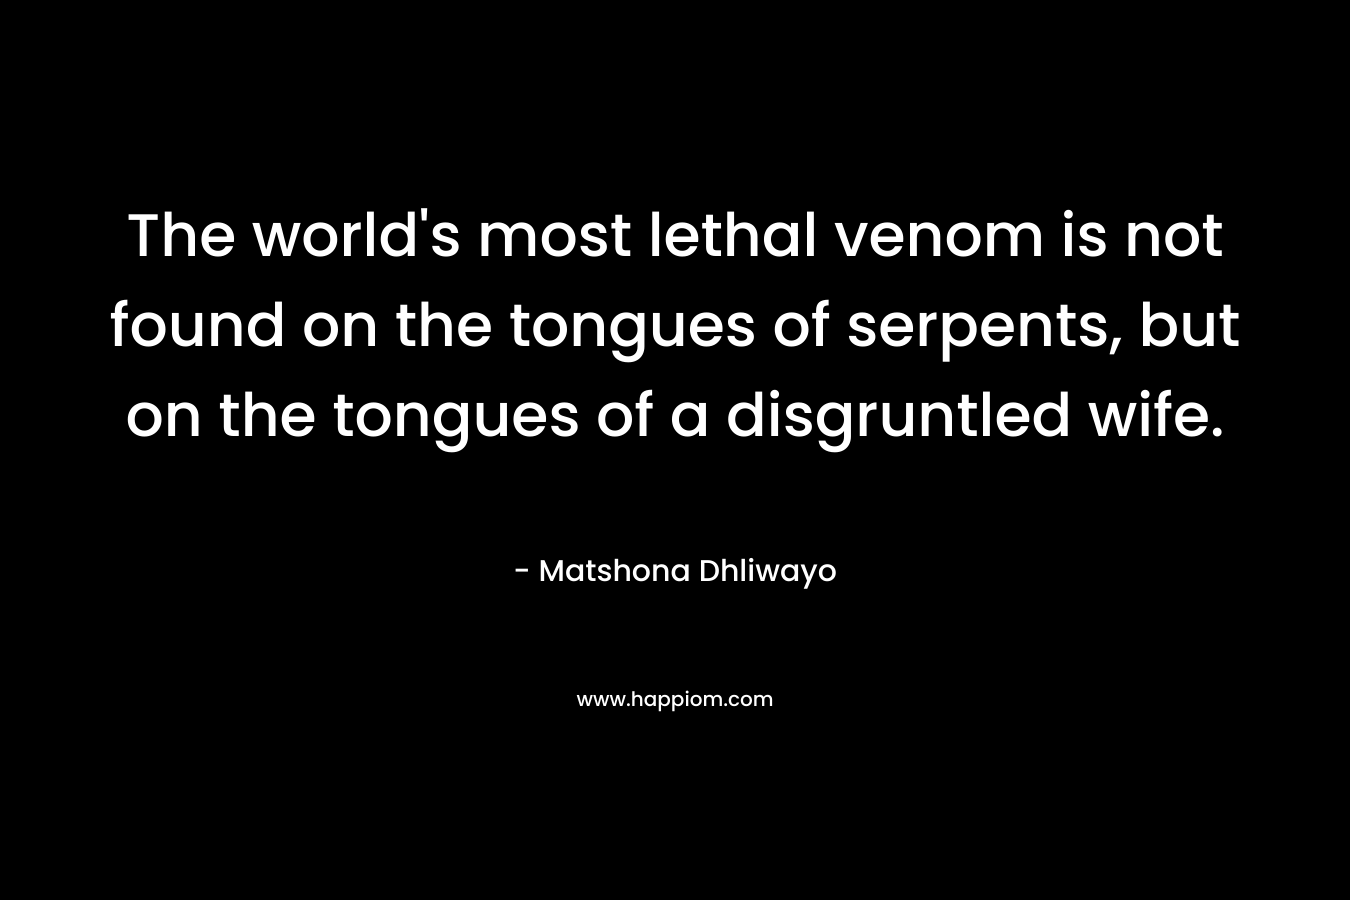 The world's most lethal venom is not found on the tongues of serpents, but on the tongues of a disgruntled wife.